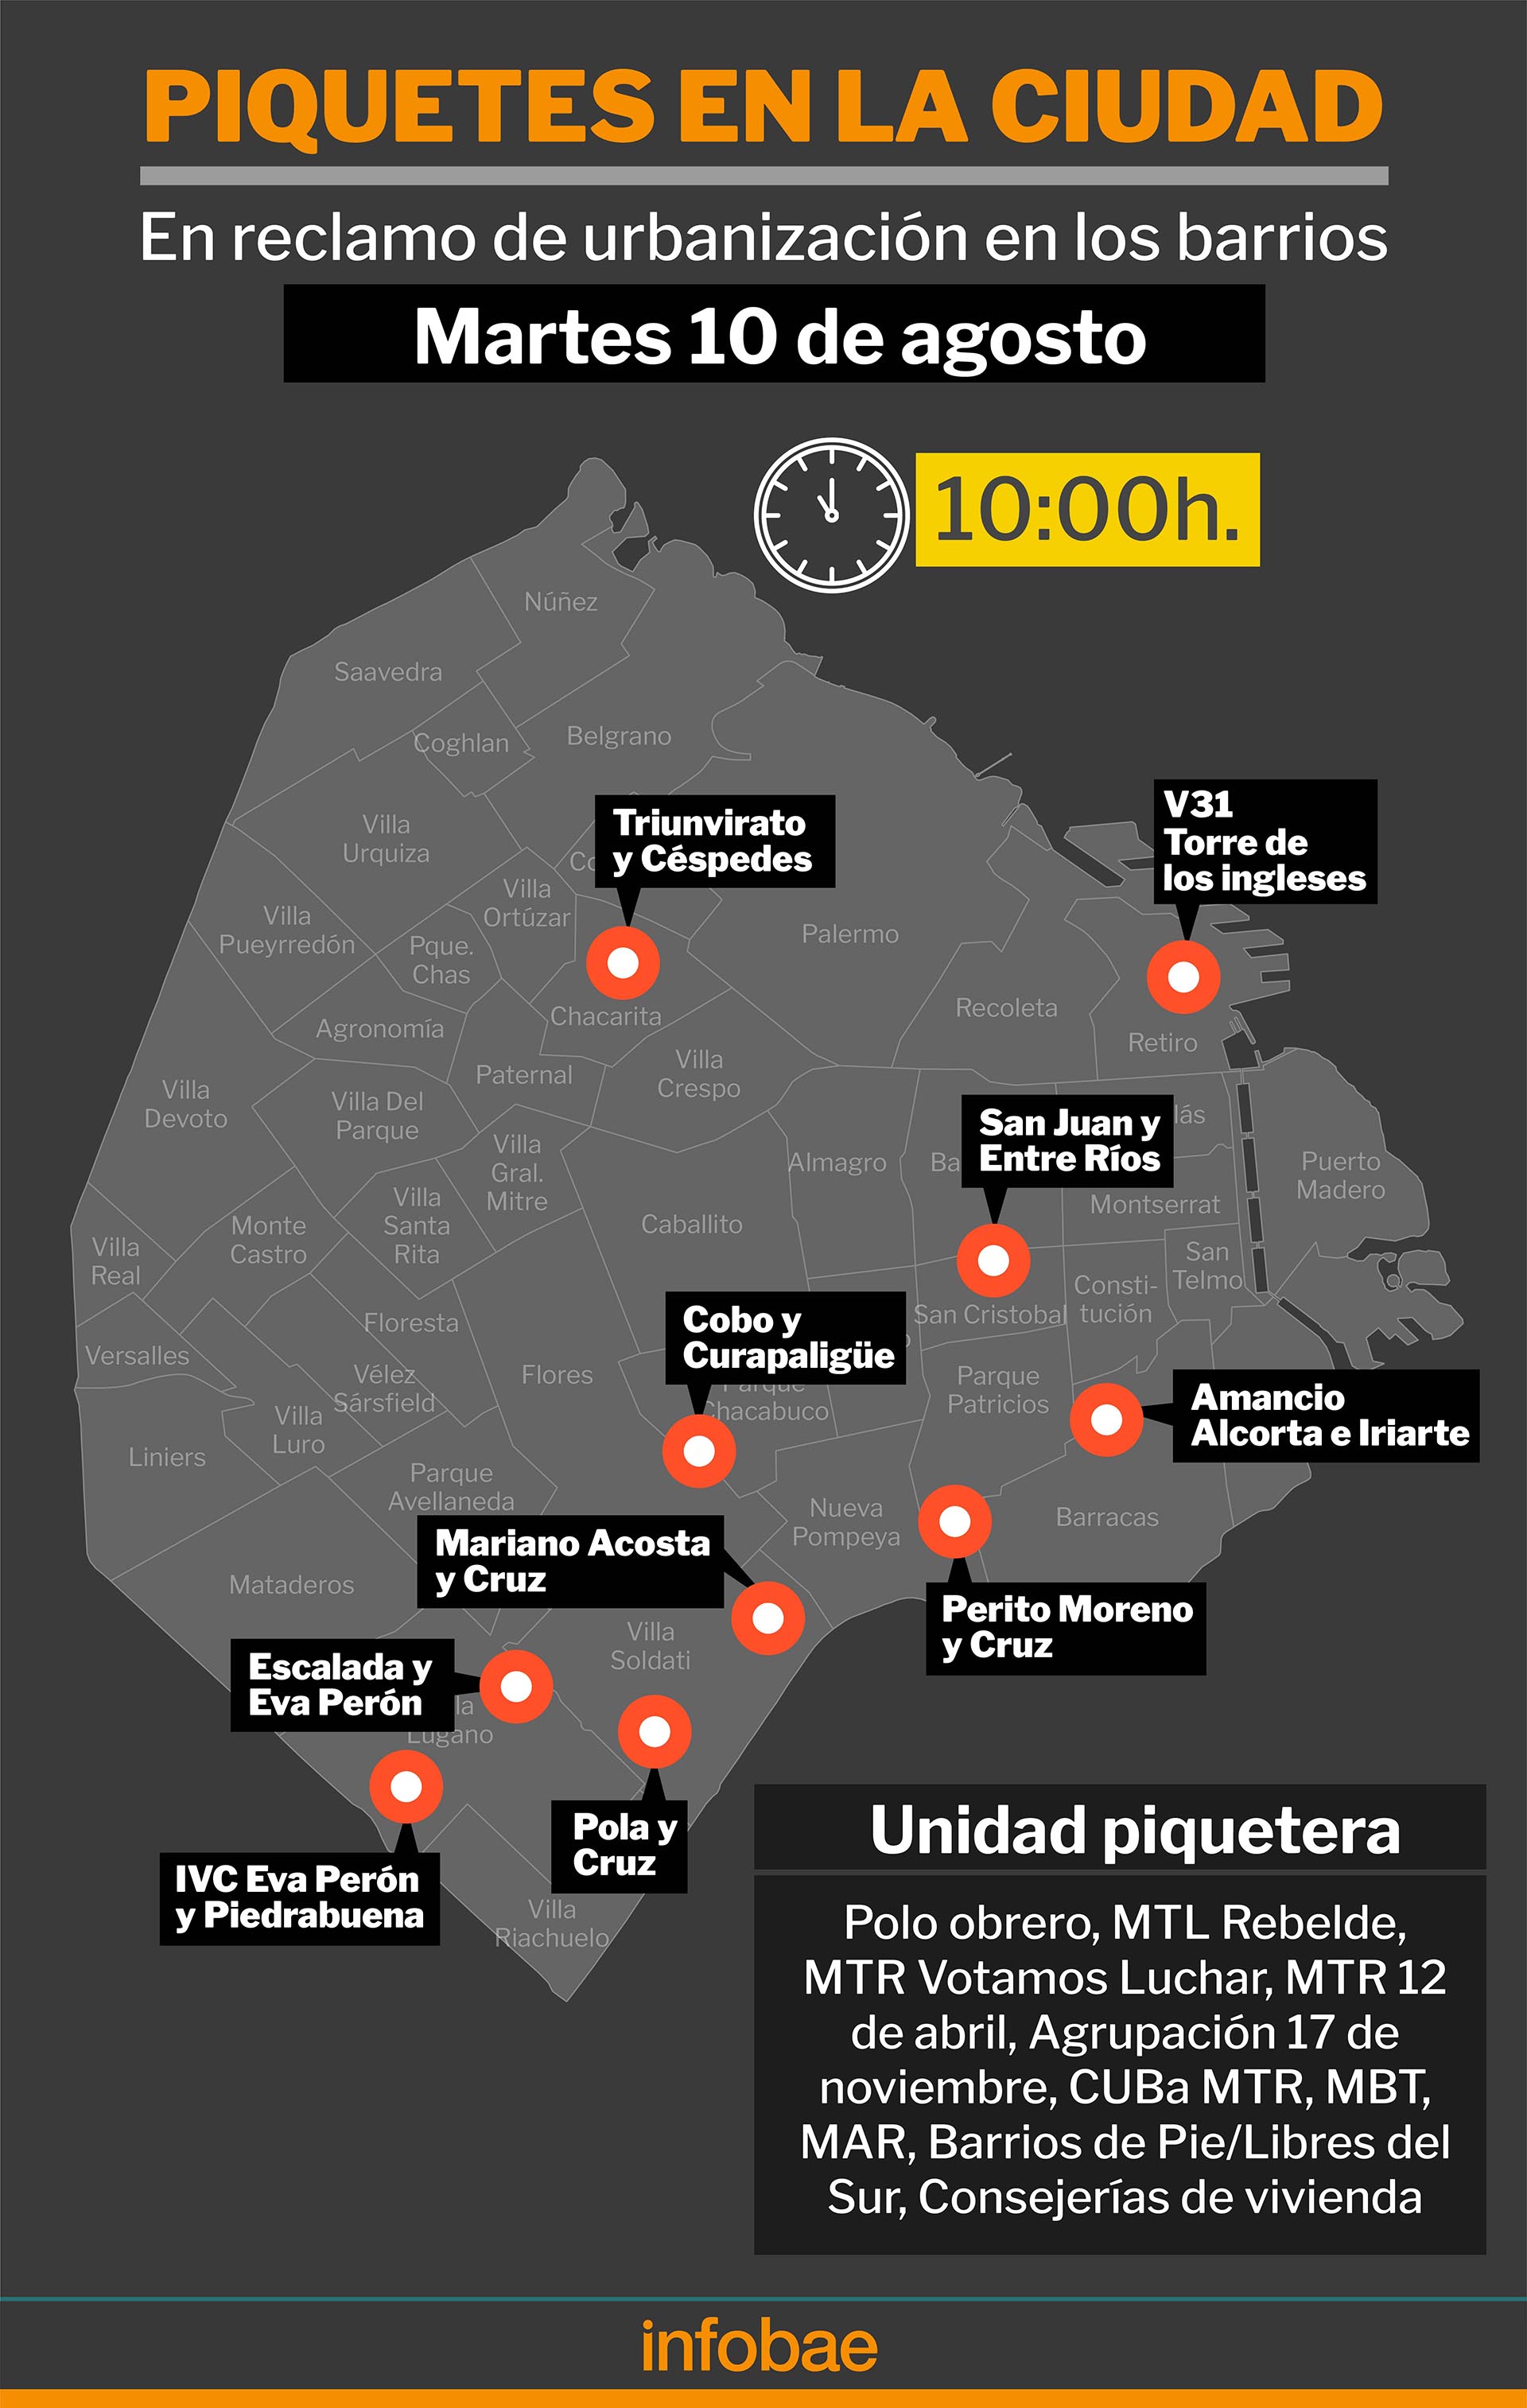 The map of the marches that the Piquetero Unit will lead